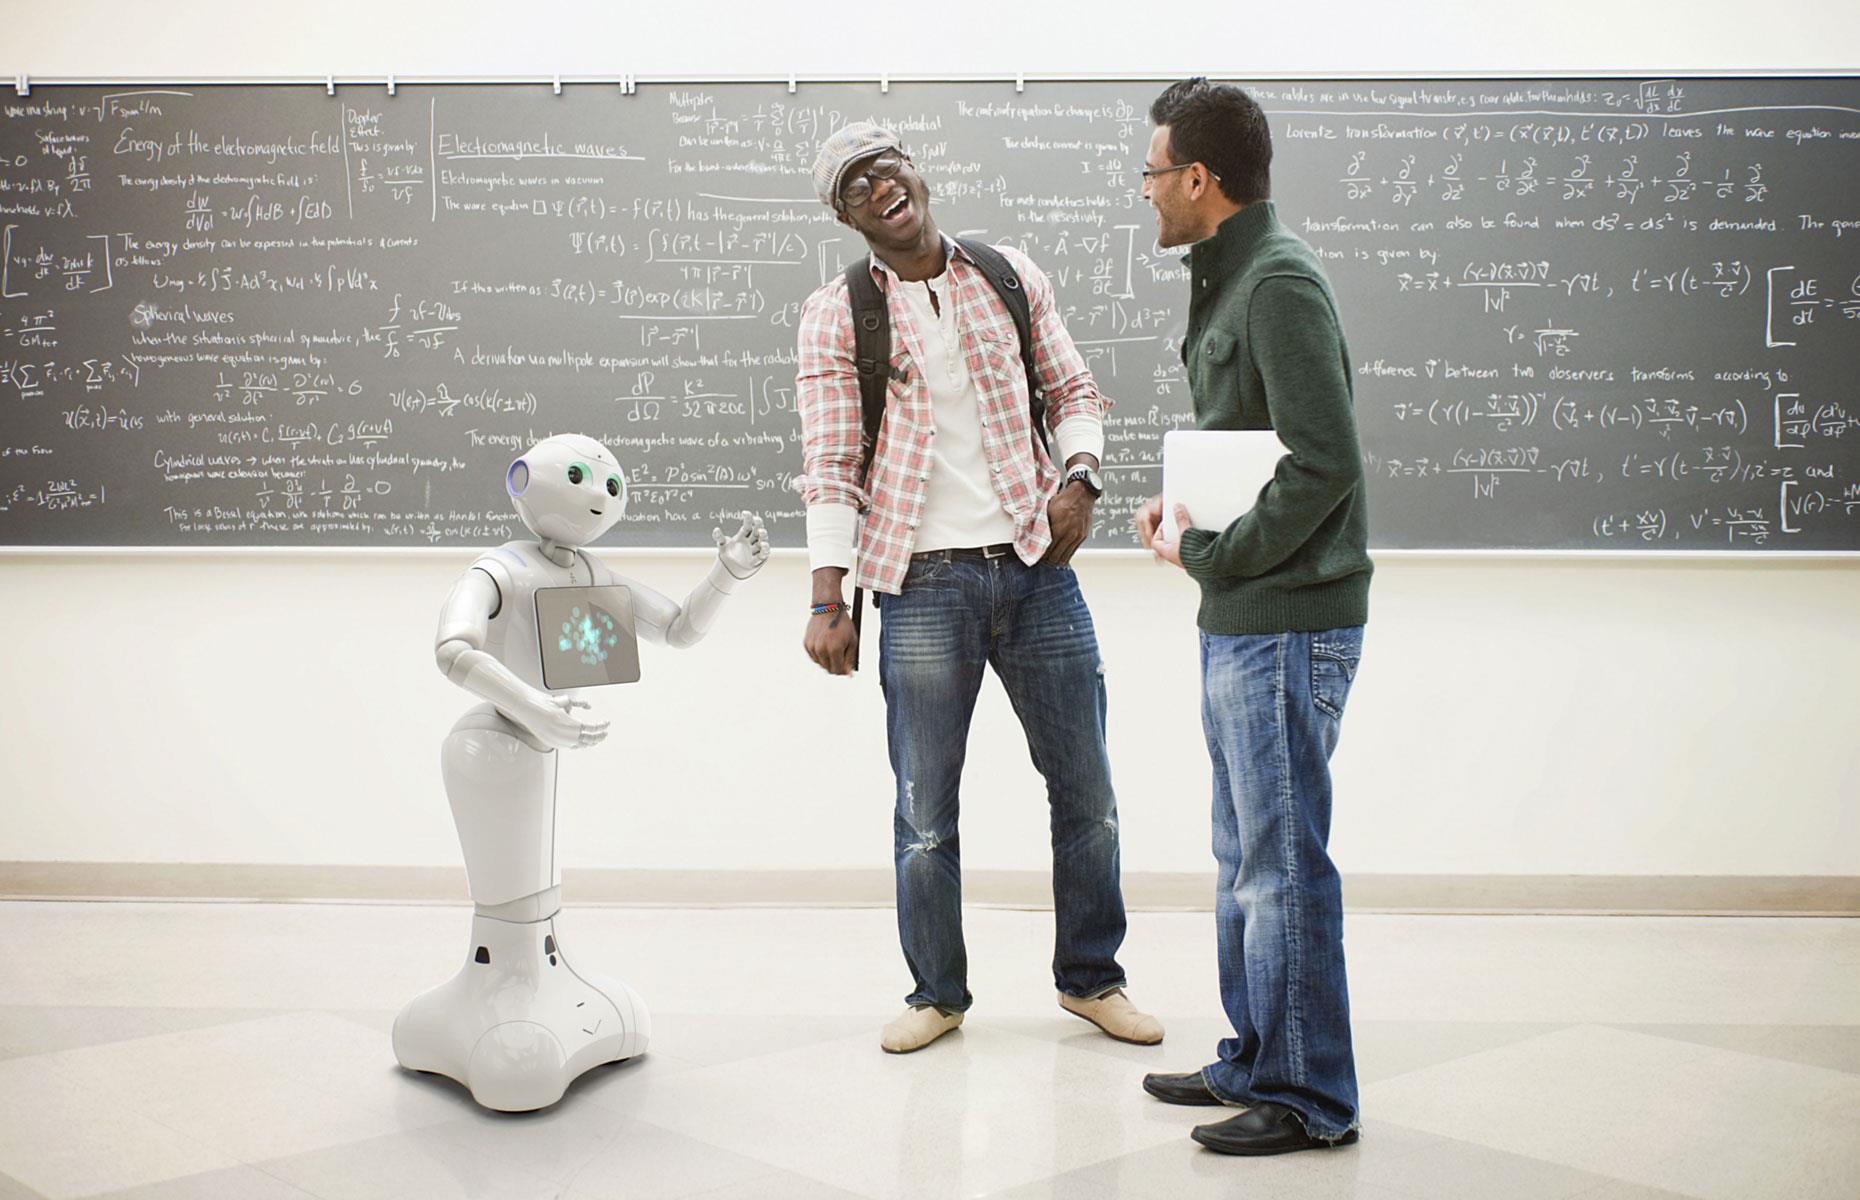 <p>An educational robot called Pepper became the UK's first automated teacher when it entered classrooms at the London Design and Engineering University Technical College in September 2016. The semi-humanoid robot, which already "taught" at a high school in Japan, is fitted with microphones, HD cameras, and 3D sensors to enable it to interact with students and even detect their emotions.</p>  <p>Softbank Robotics, the company behind Pepper, confirmed in June 2021 that it was pausing production due to a lack of demand. However, Pepper isn't the only robot that's taken to the classroom. The Personal Robots Group at the Massachusetts Institute of Technology (MIT) has developed Tega, a fluffy "social robot" that acts as a learning assistant for young children. </p>